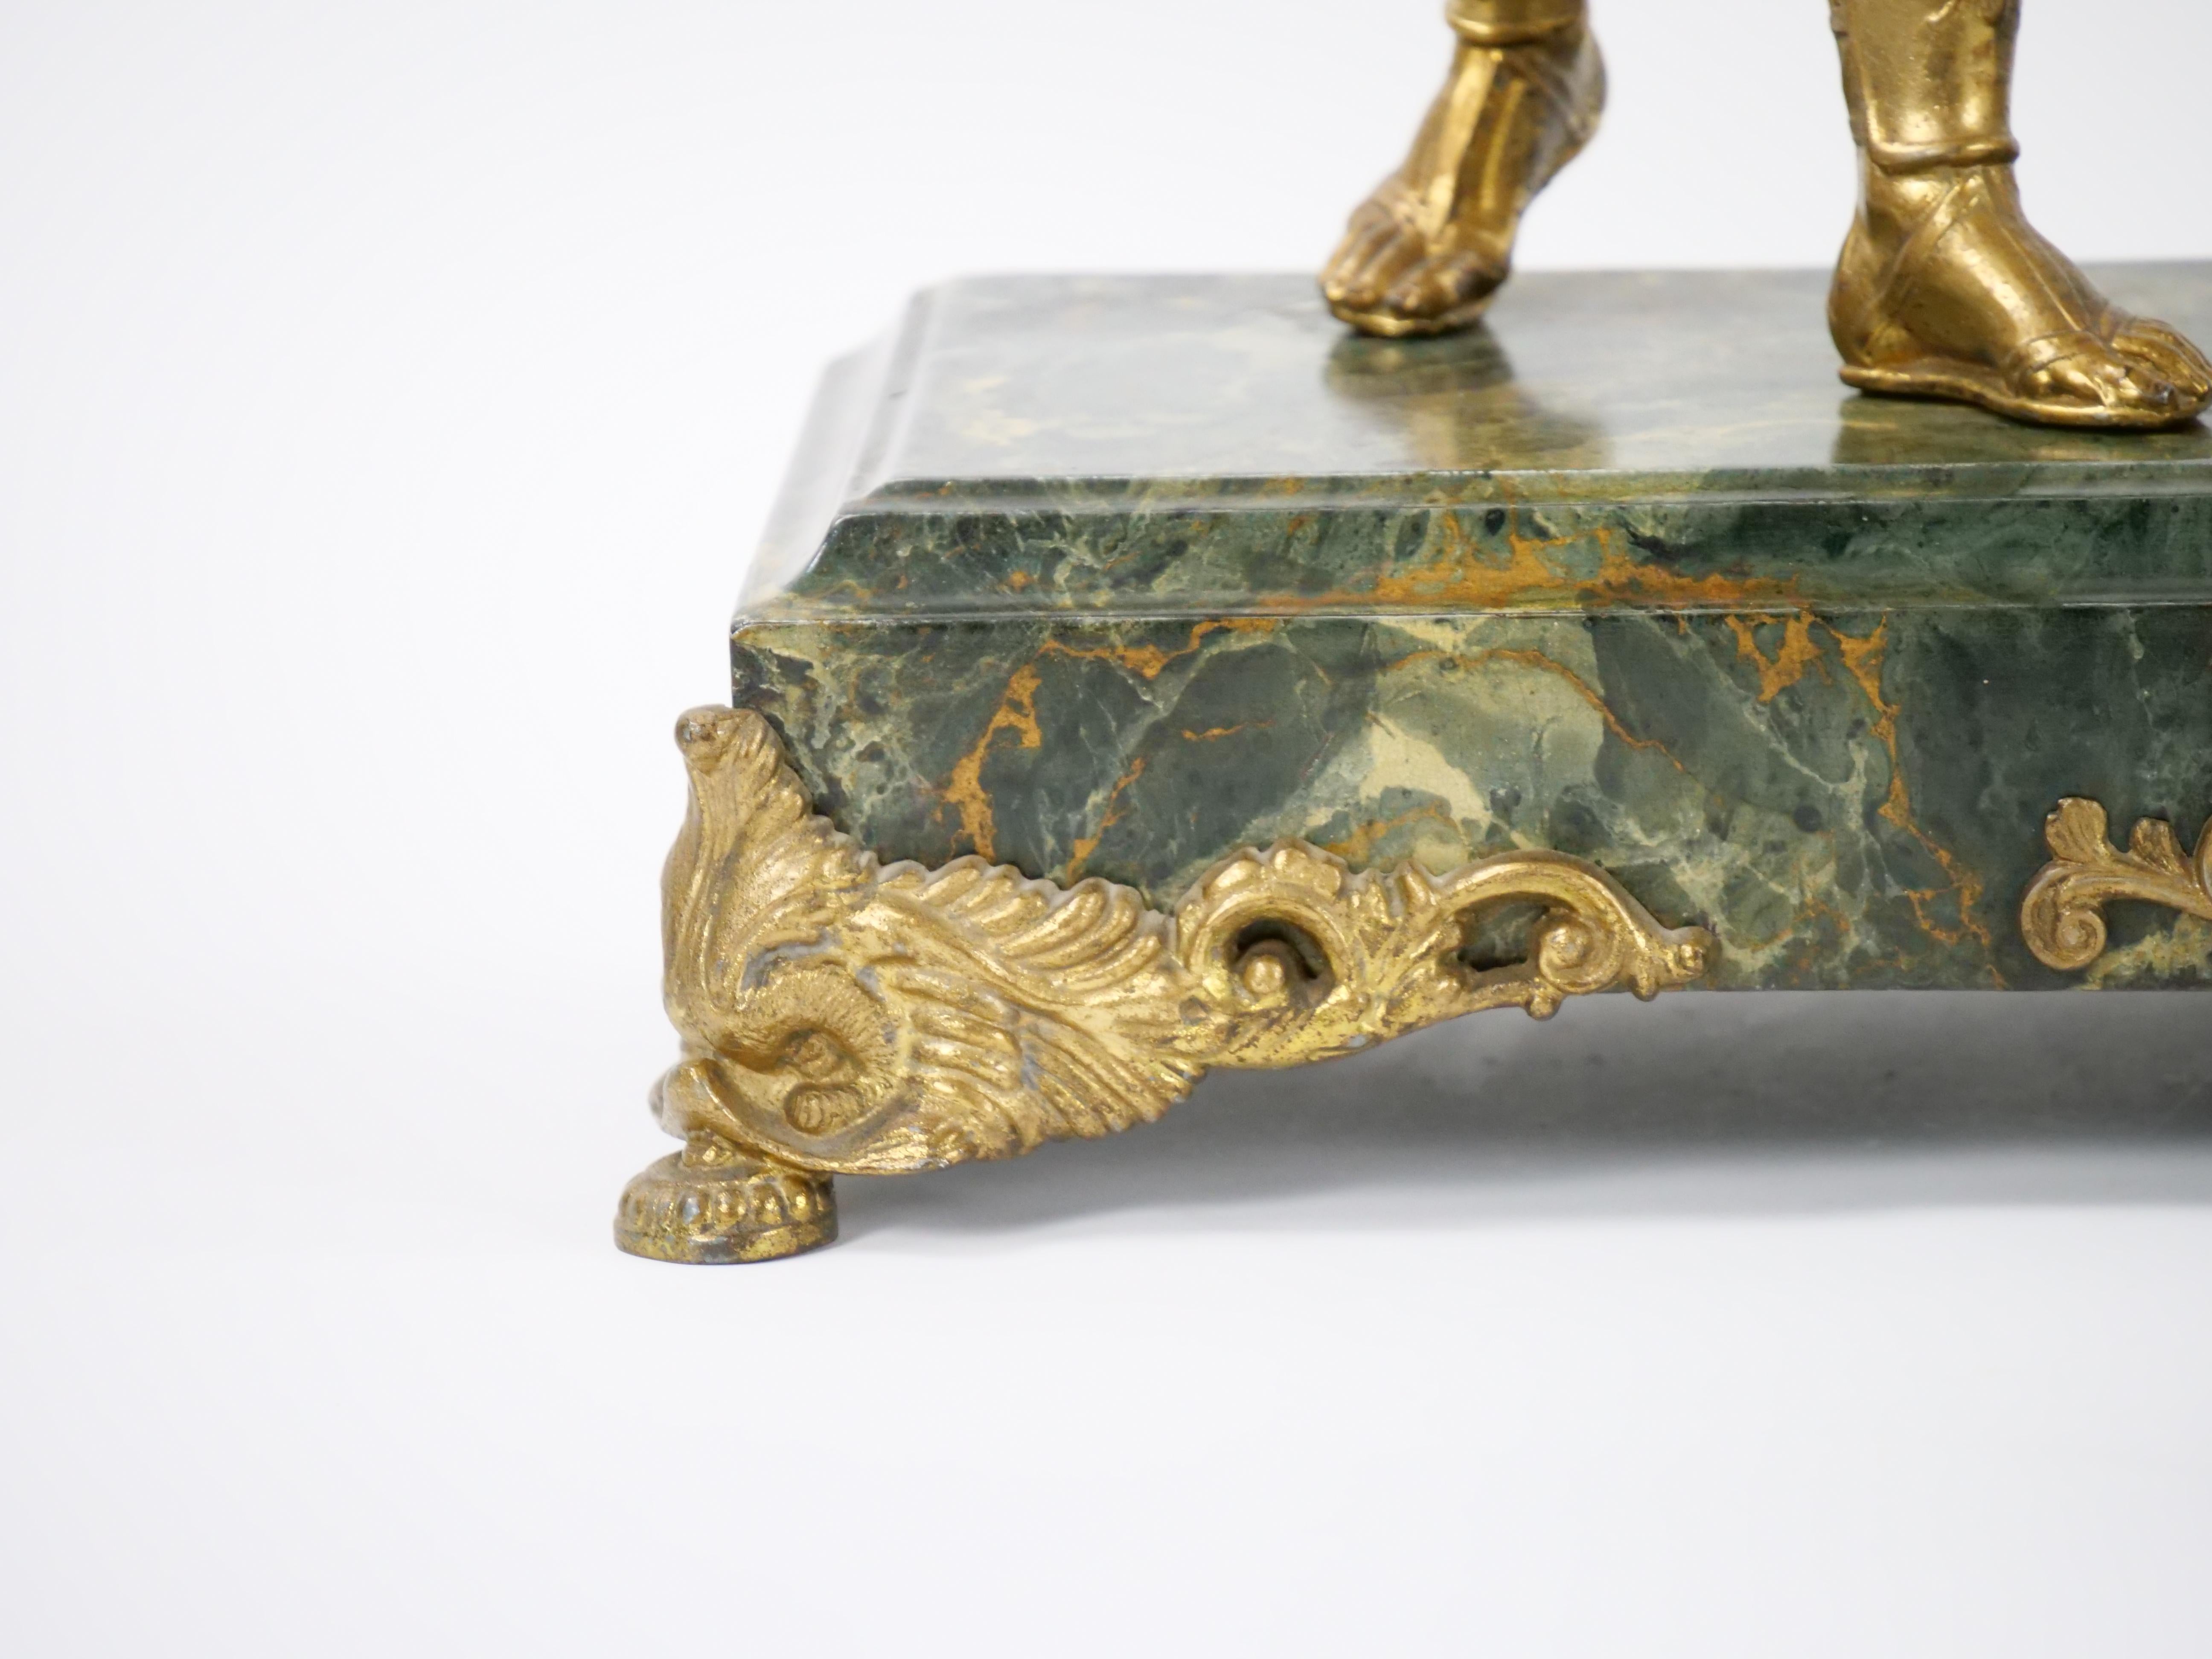  Gilt Bronze Footed Marble Base Mantel Clock Depicting Carthage Warrior For Sale 3